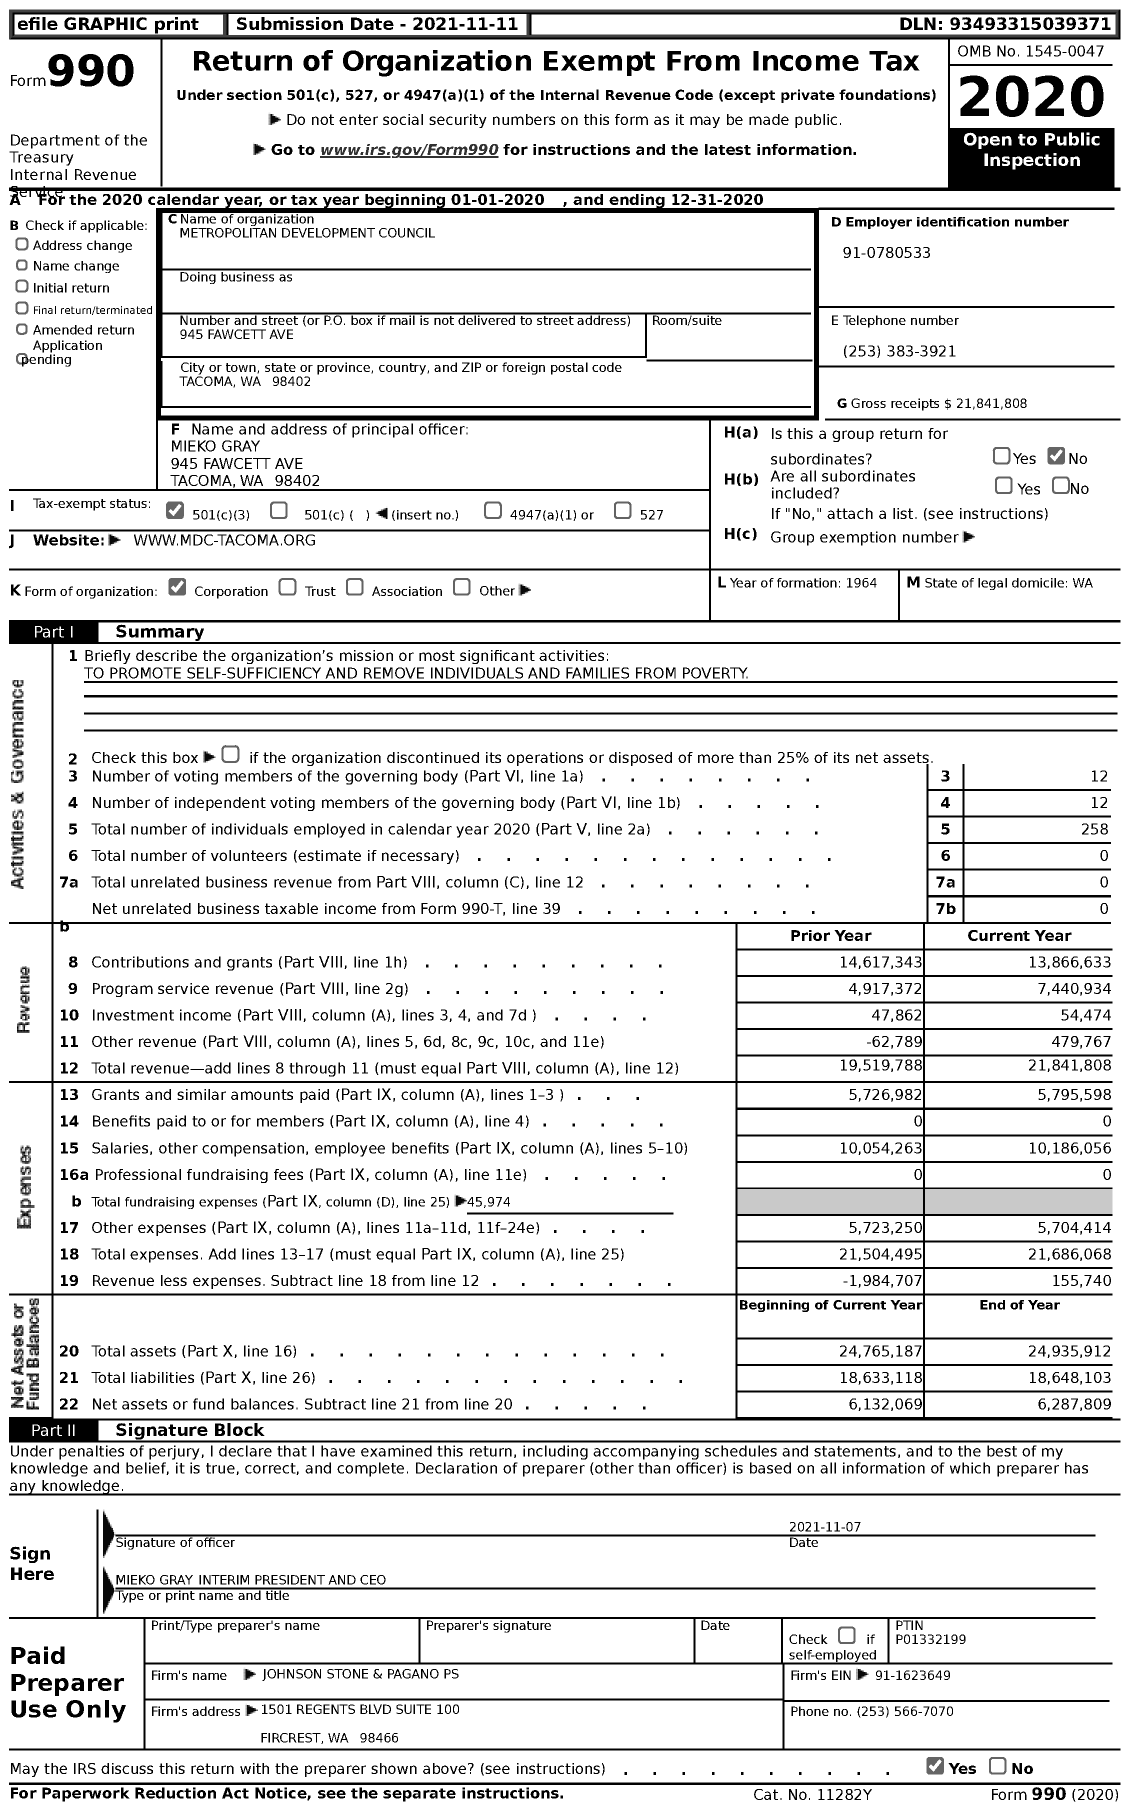 Image of first page of 2020 Form 990 for Metropolitan Development Council (MDC)